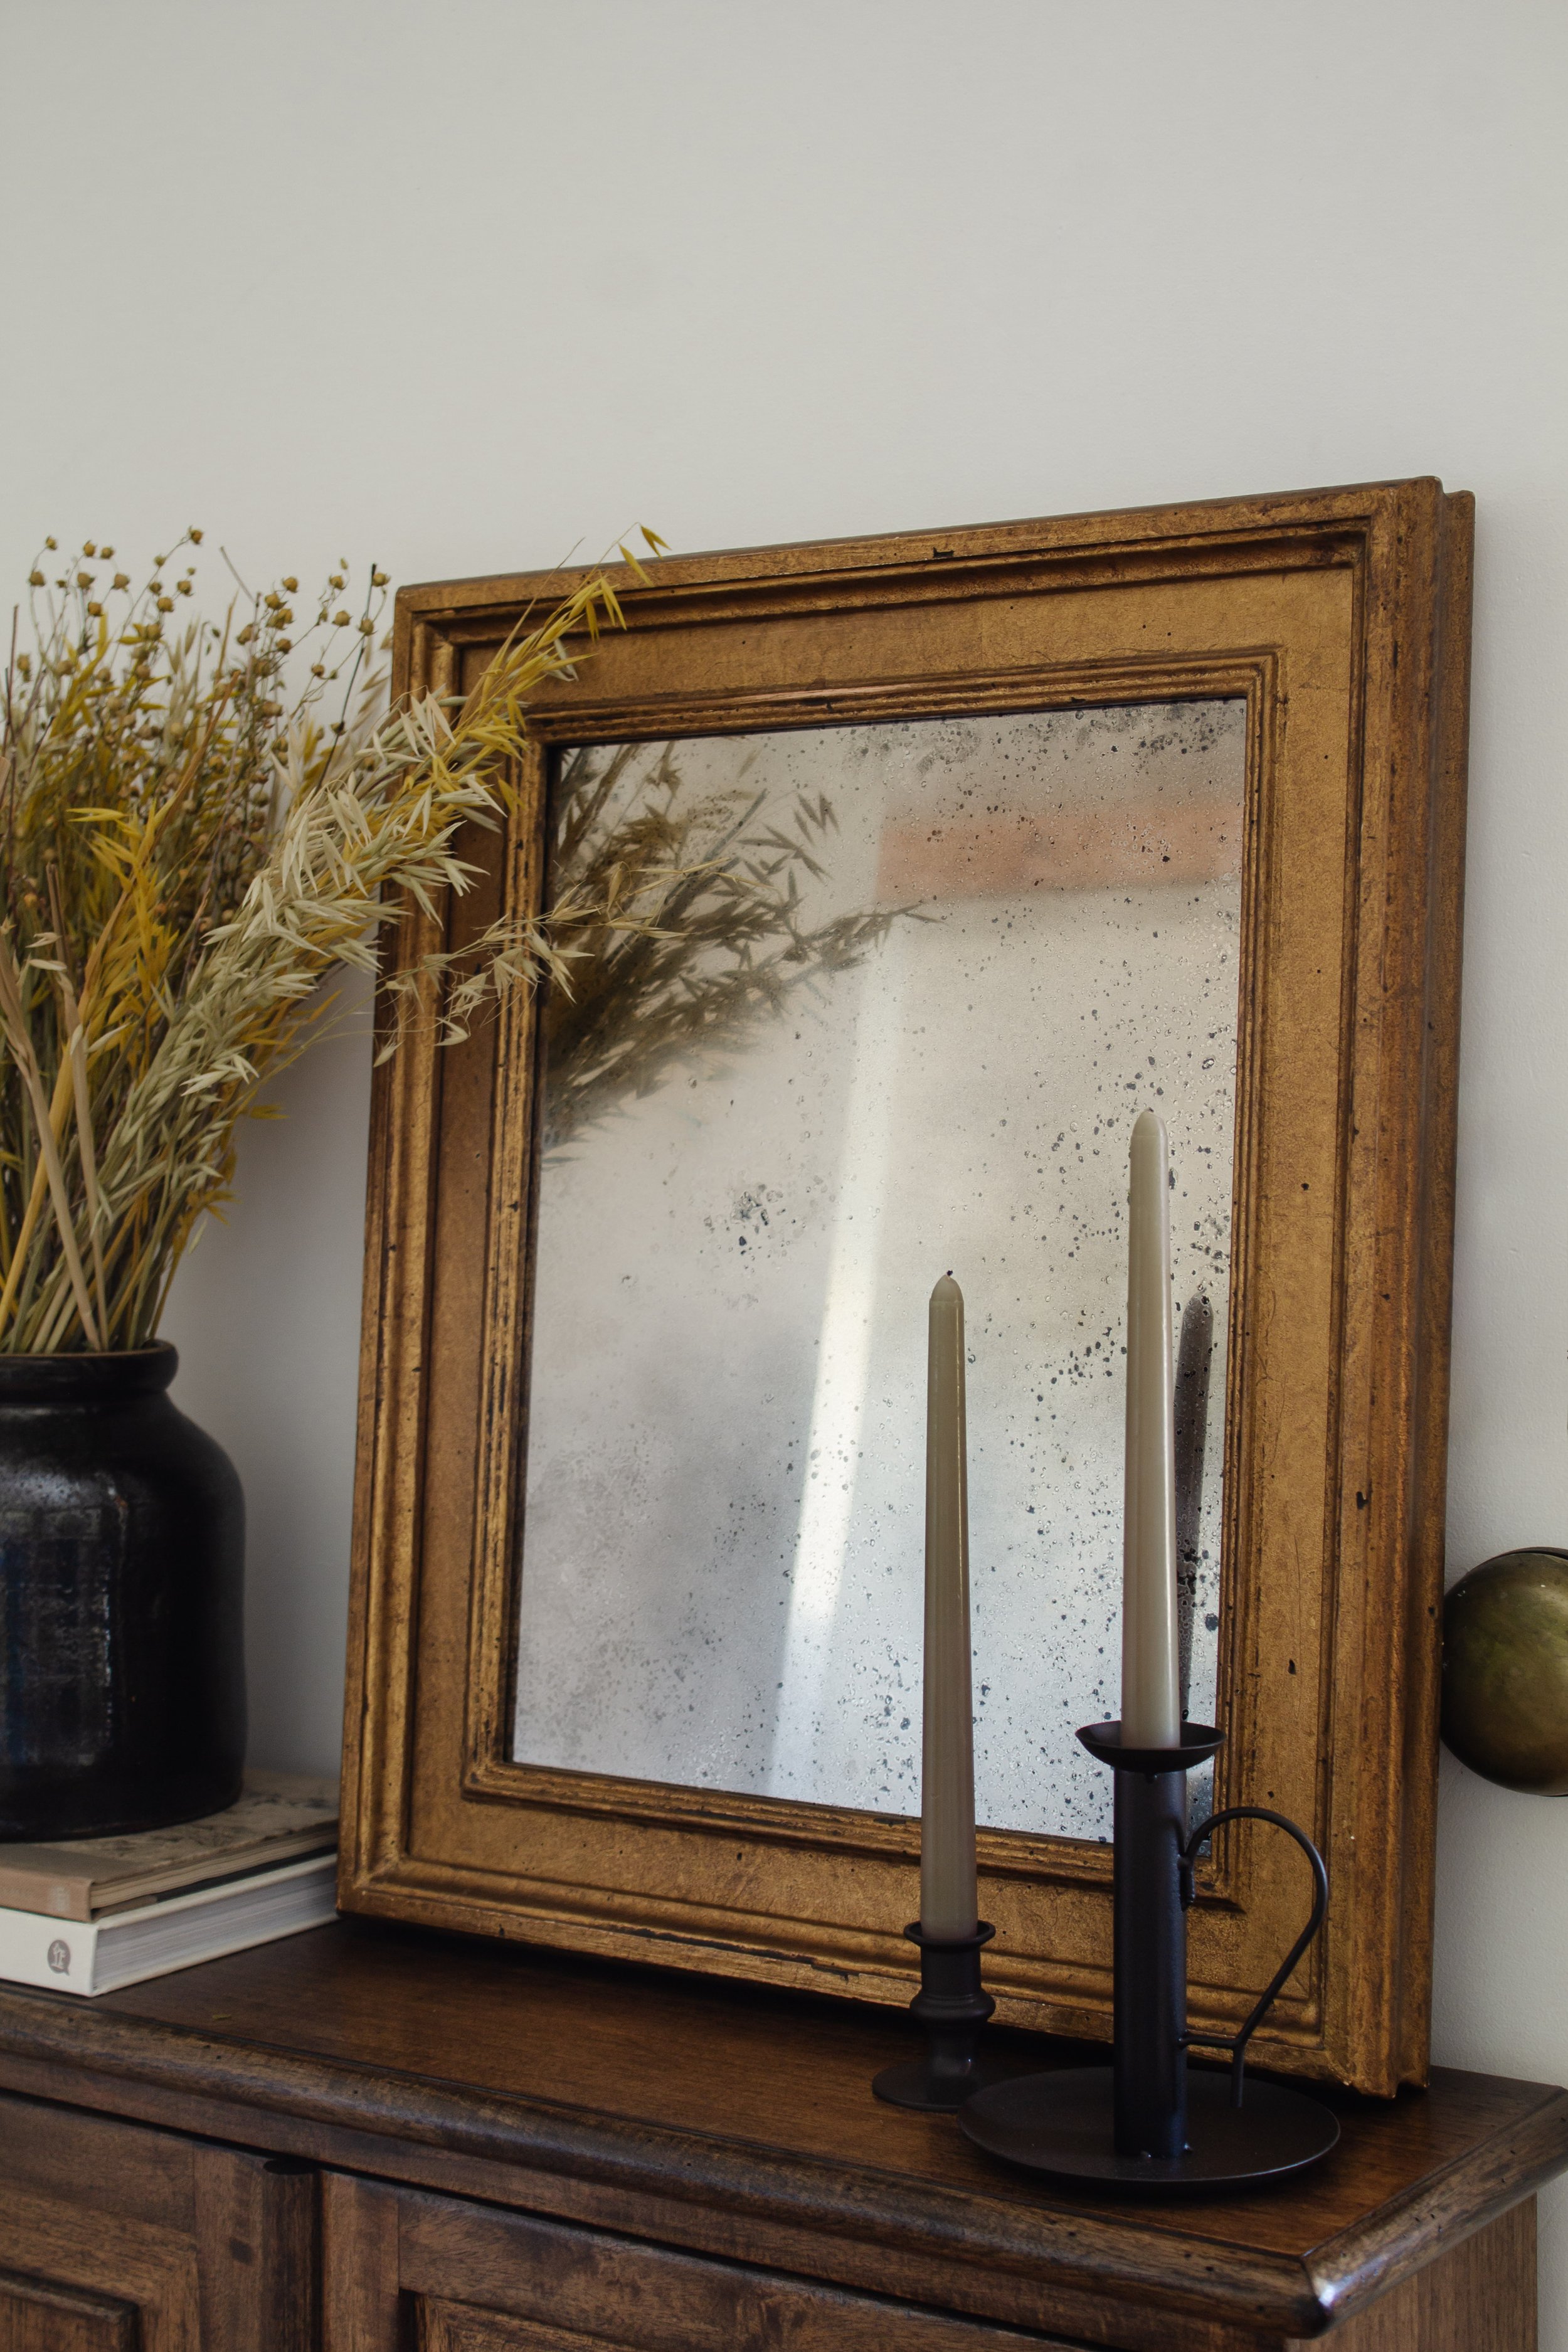 How To Diy Antique Mirror For Less, How Do You Antique A Mirror With Vinegar